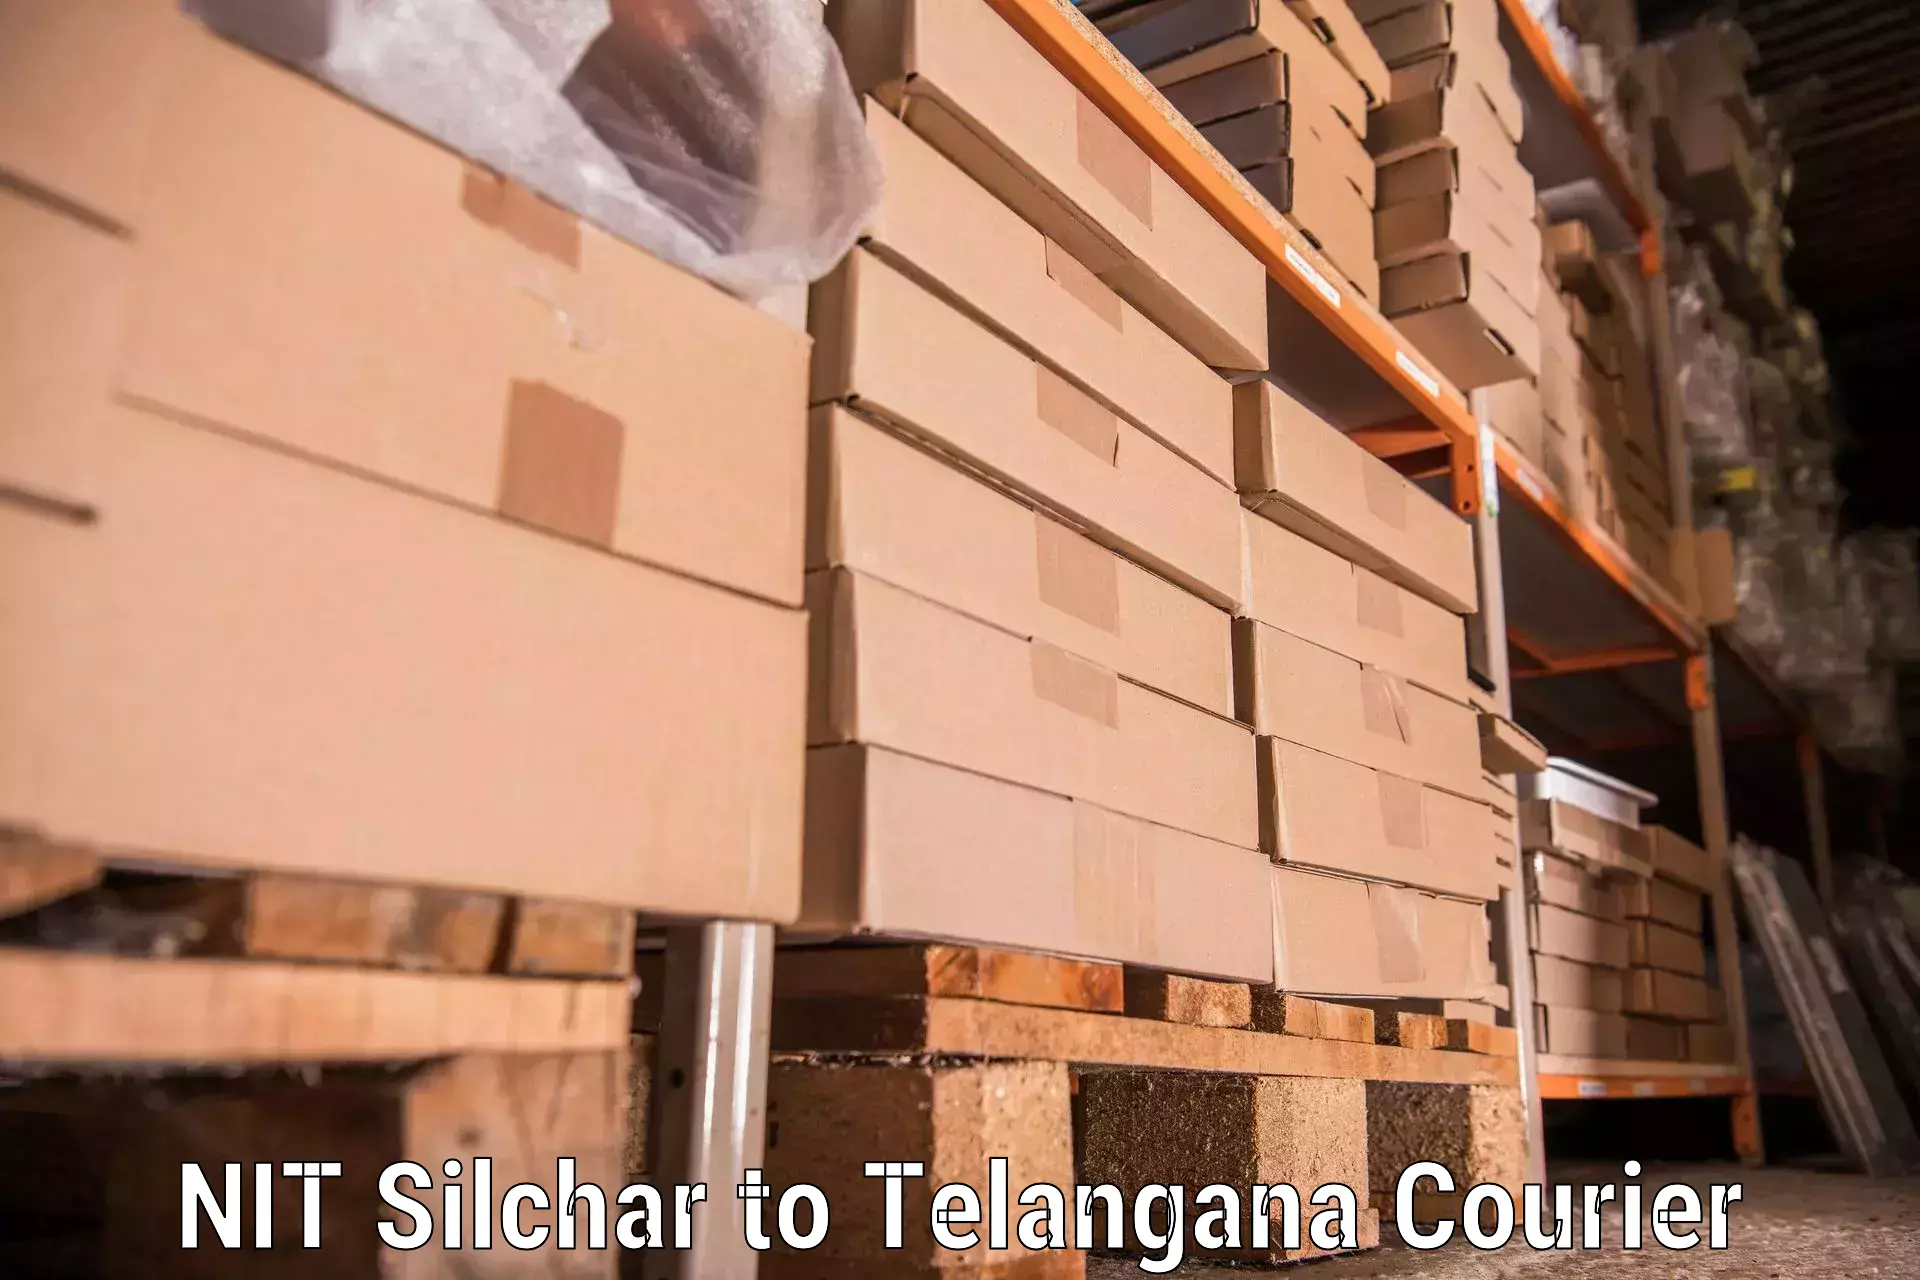 Efficient moving company NIT Silchar to Pregnapur